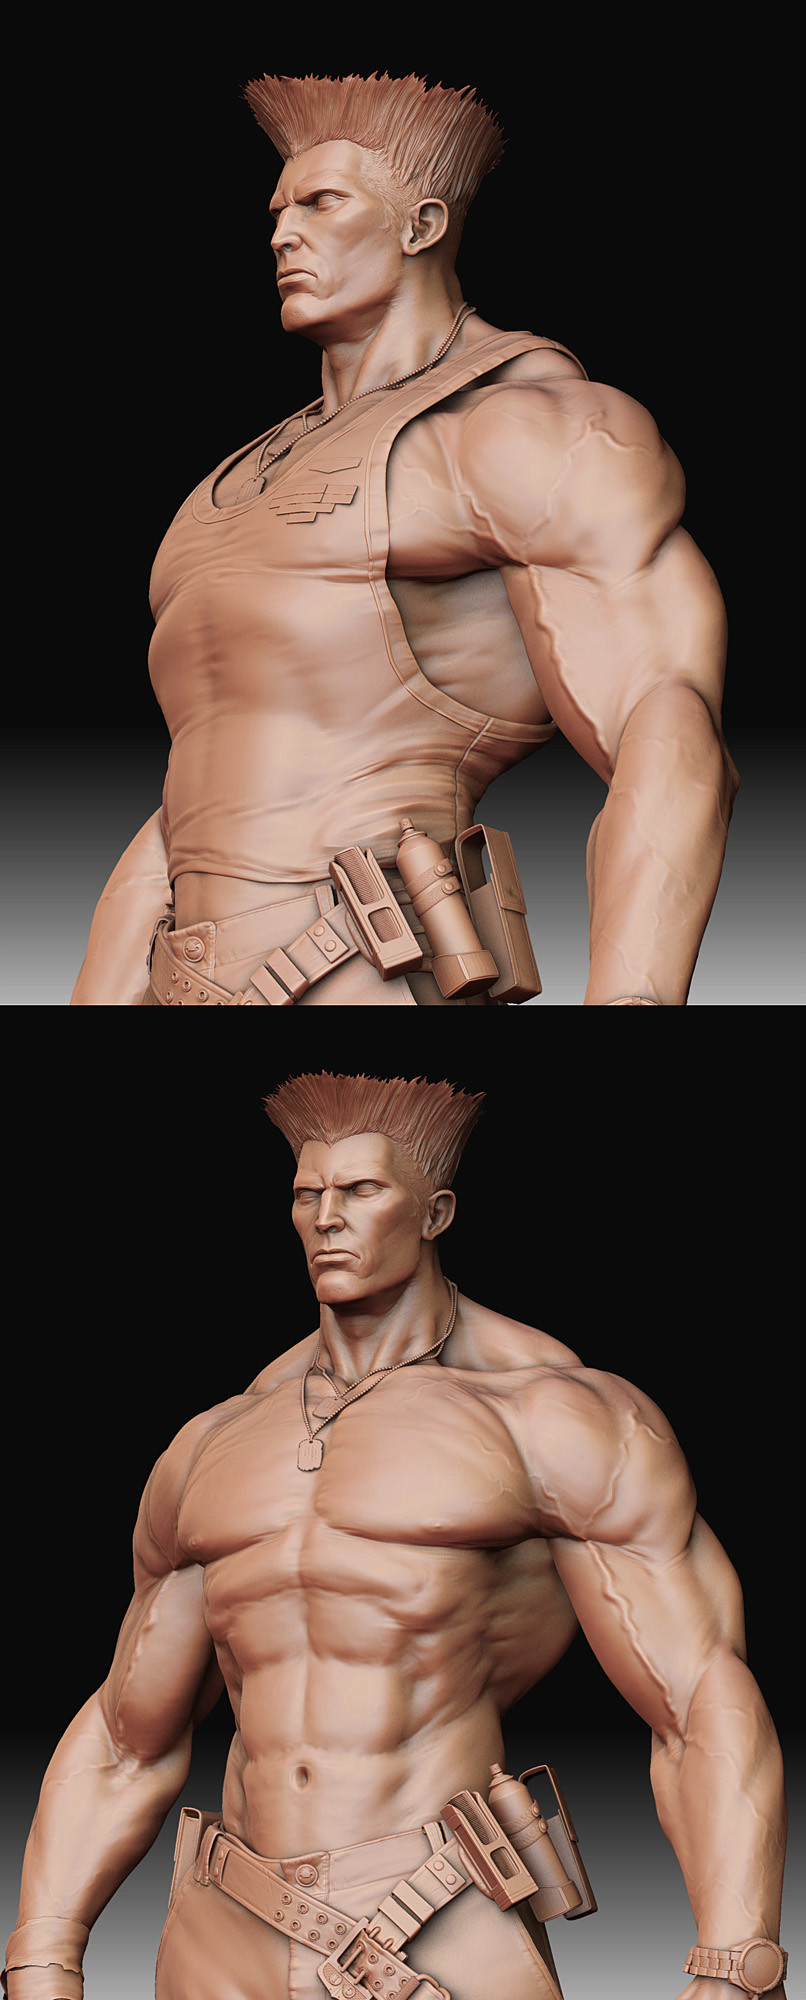 guile (street fighter) drawn by mike_kime